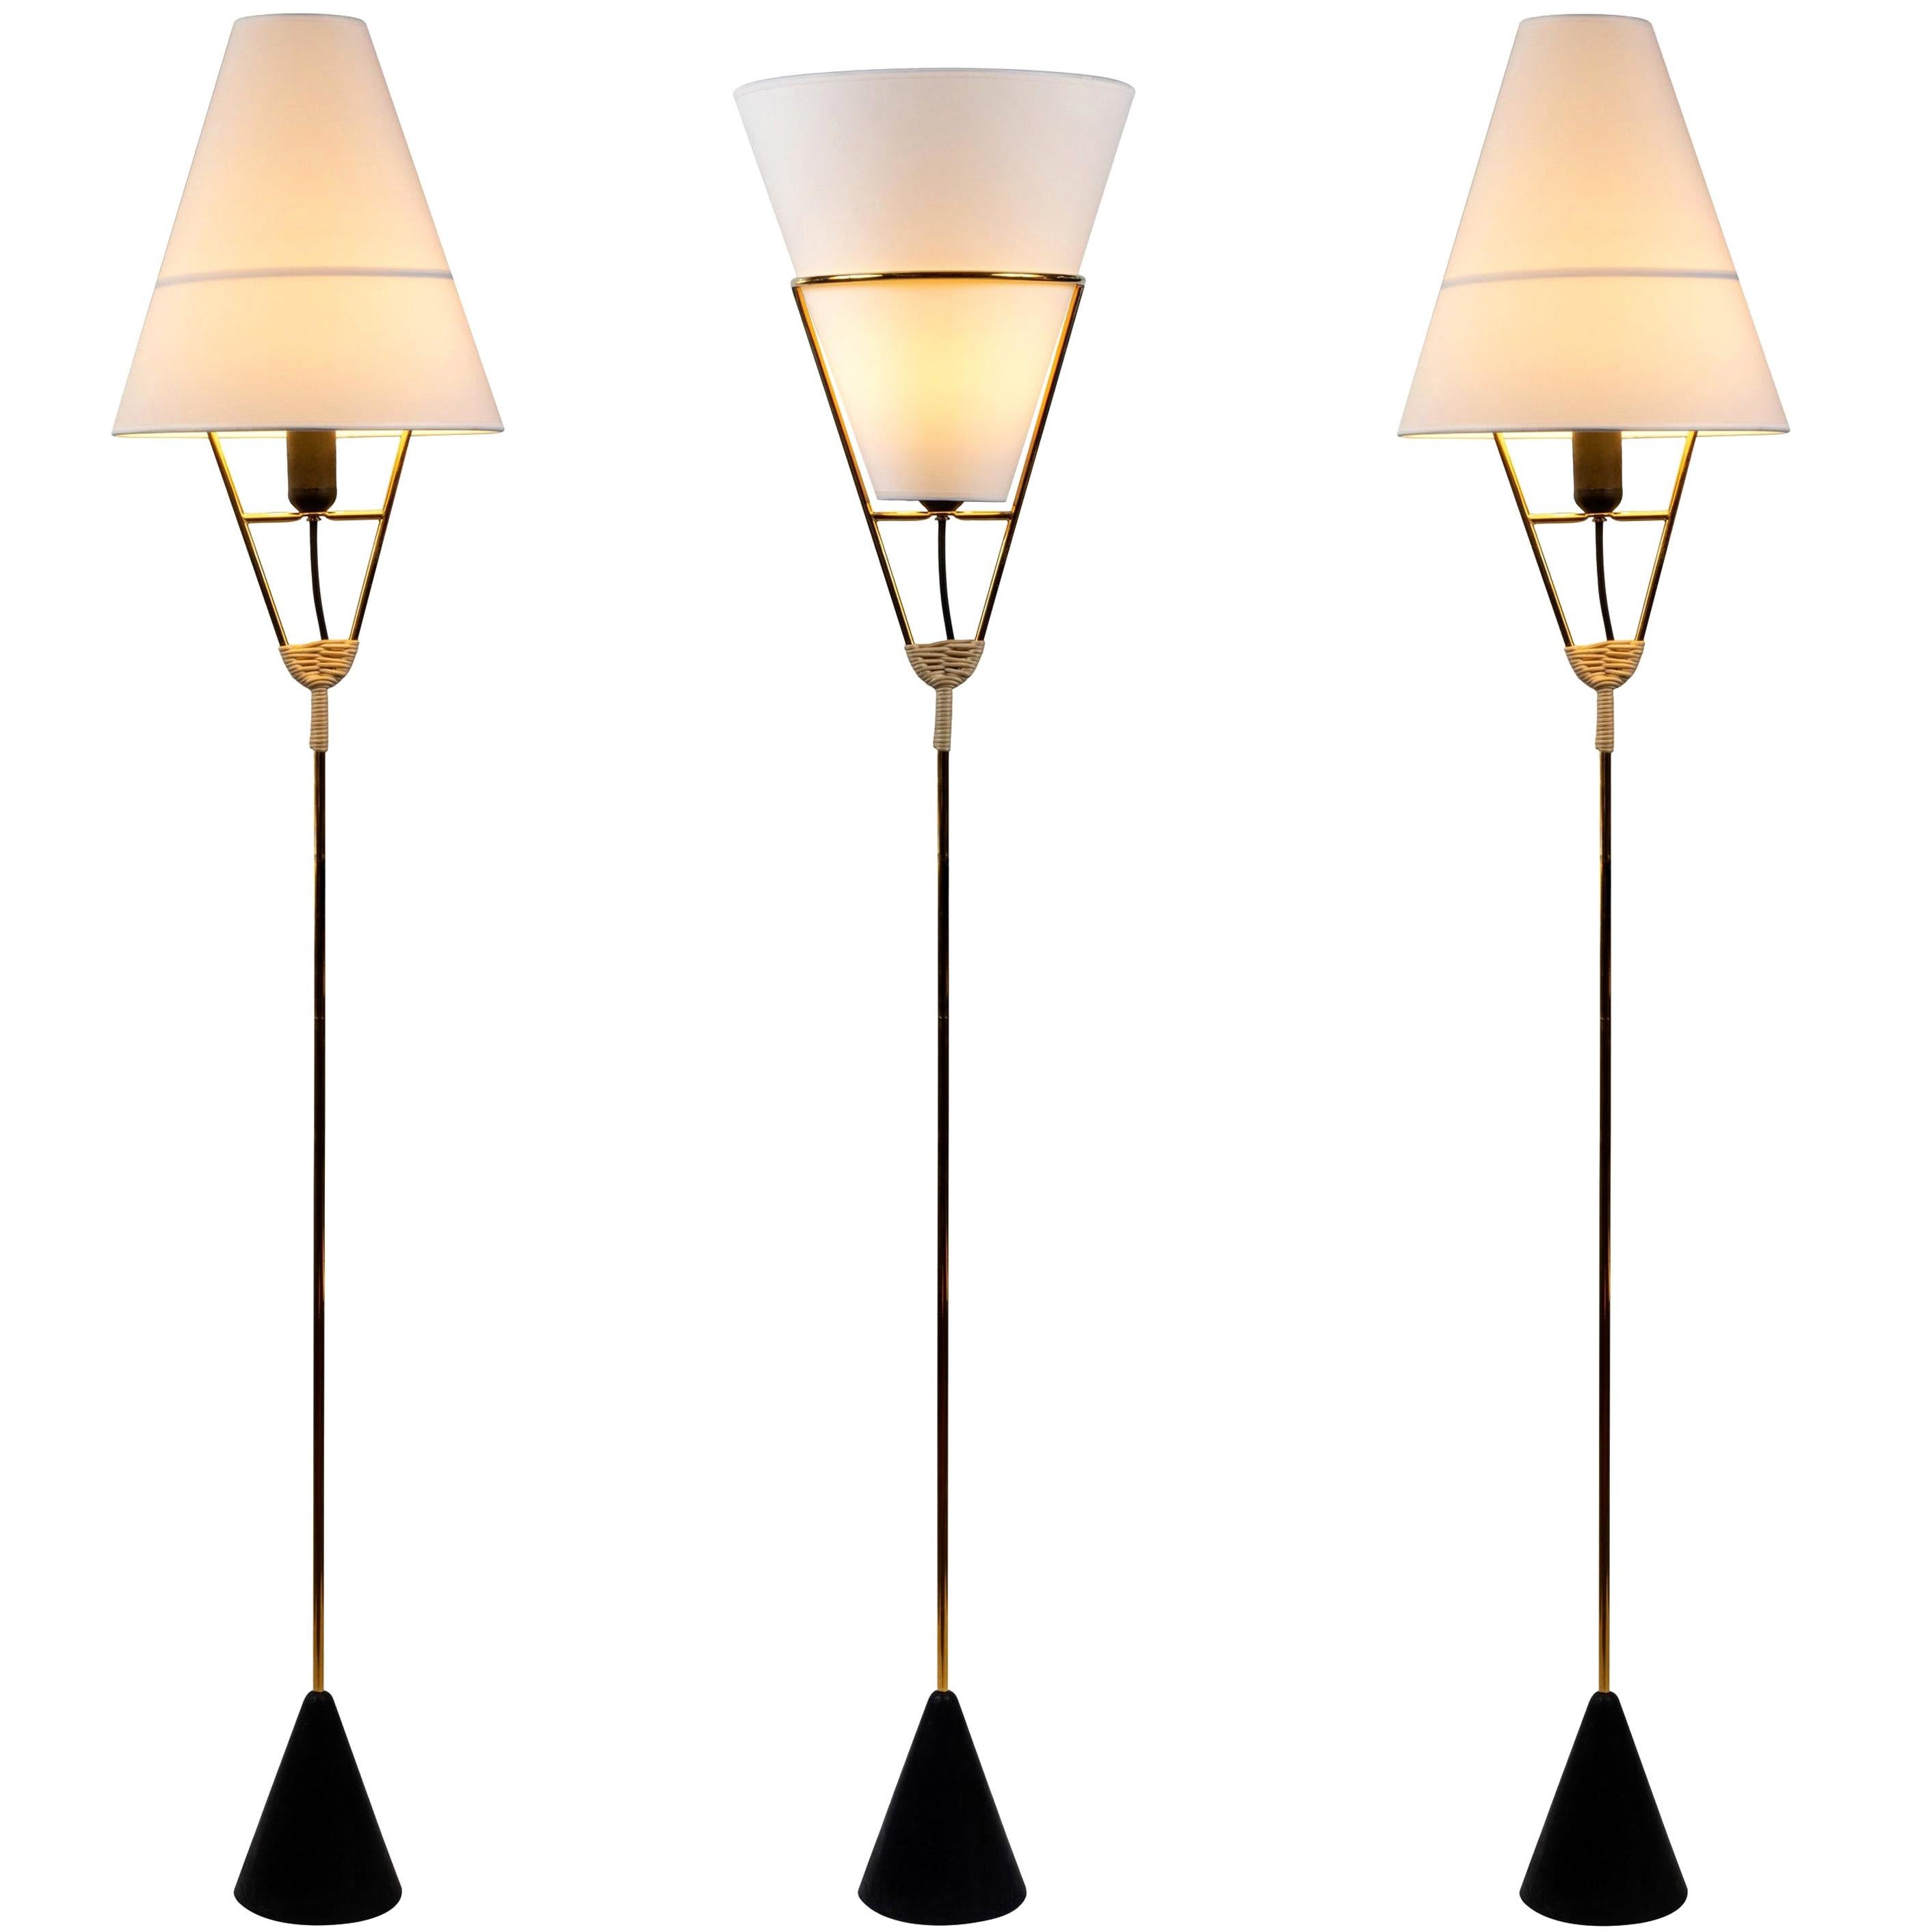 Pair of Carl Auböck vice versa floor lamps. Executed in brass, wicker and cast iron designed by Werkstätte Carl Auböck, Austria, circa 1950. Produced by Carl Auböck IV in the original Auböck Werkstätte in the 7th district of Vienna using the same